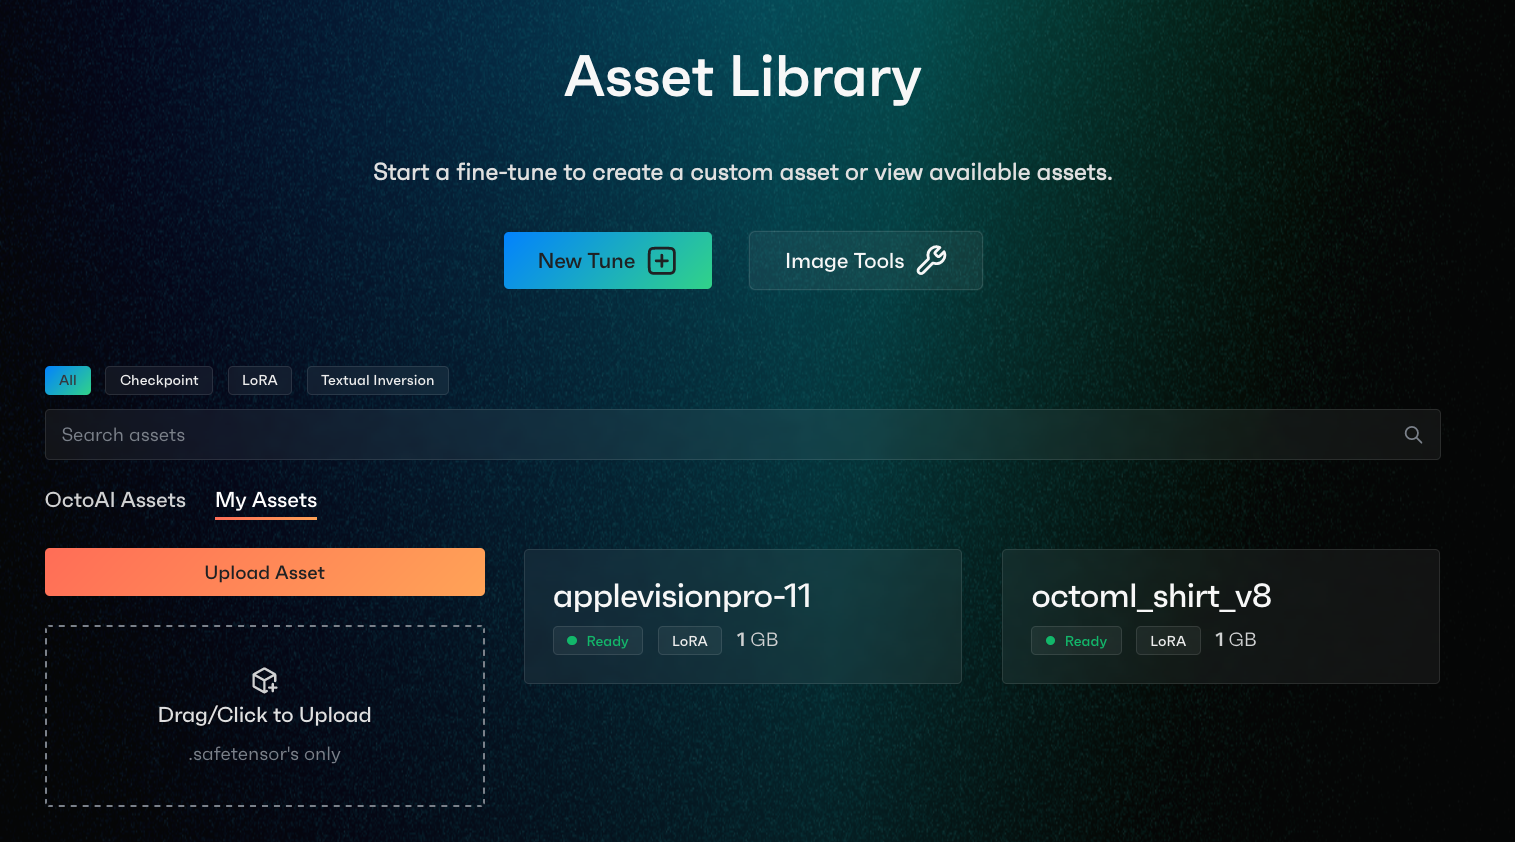 OctoAI Asset Library UI with two custom assets of VR headsets and the OctoAI shirt || '